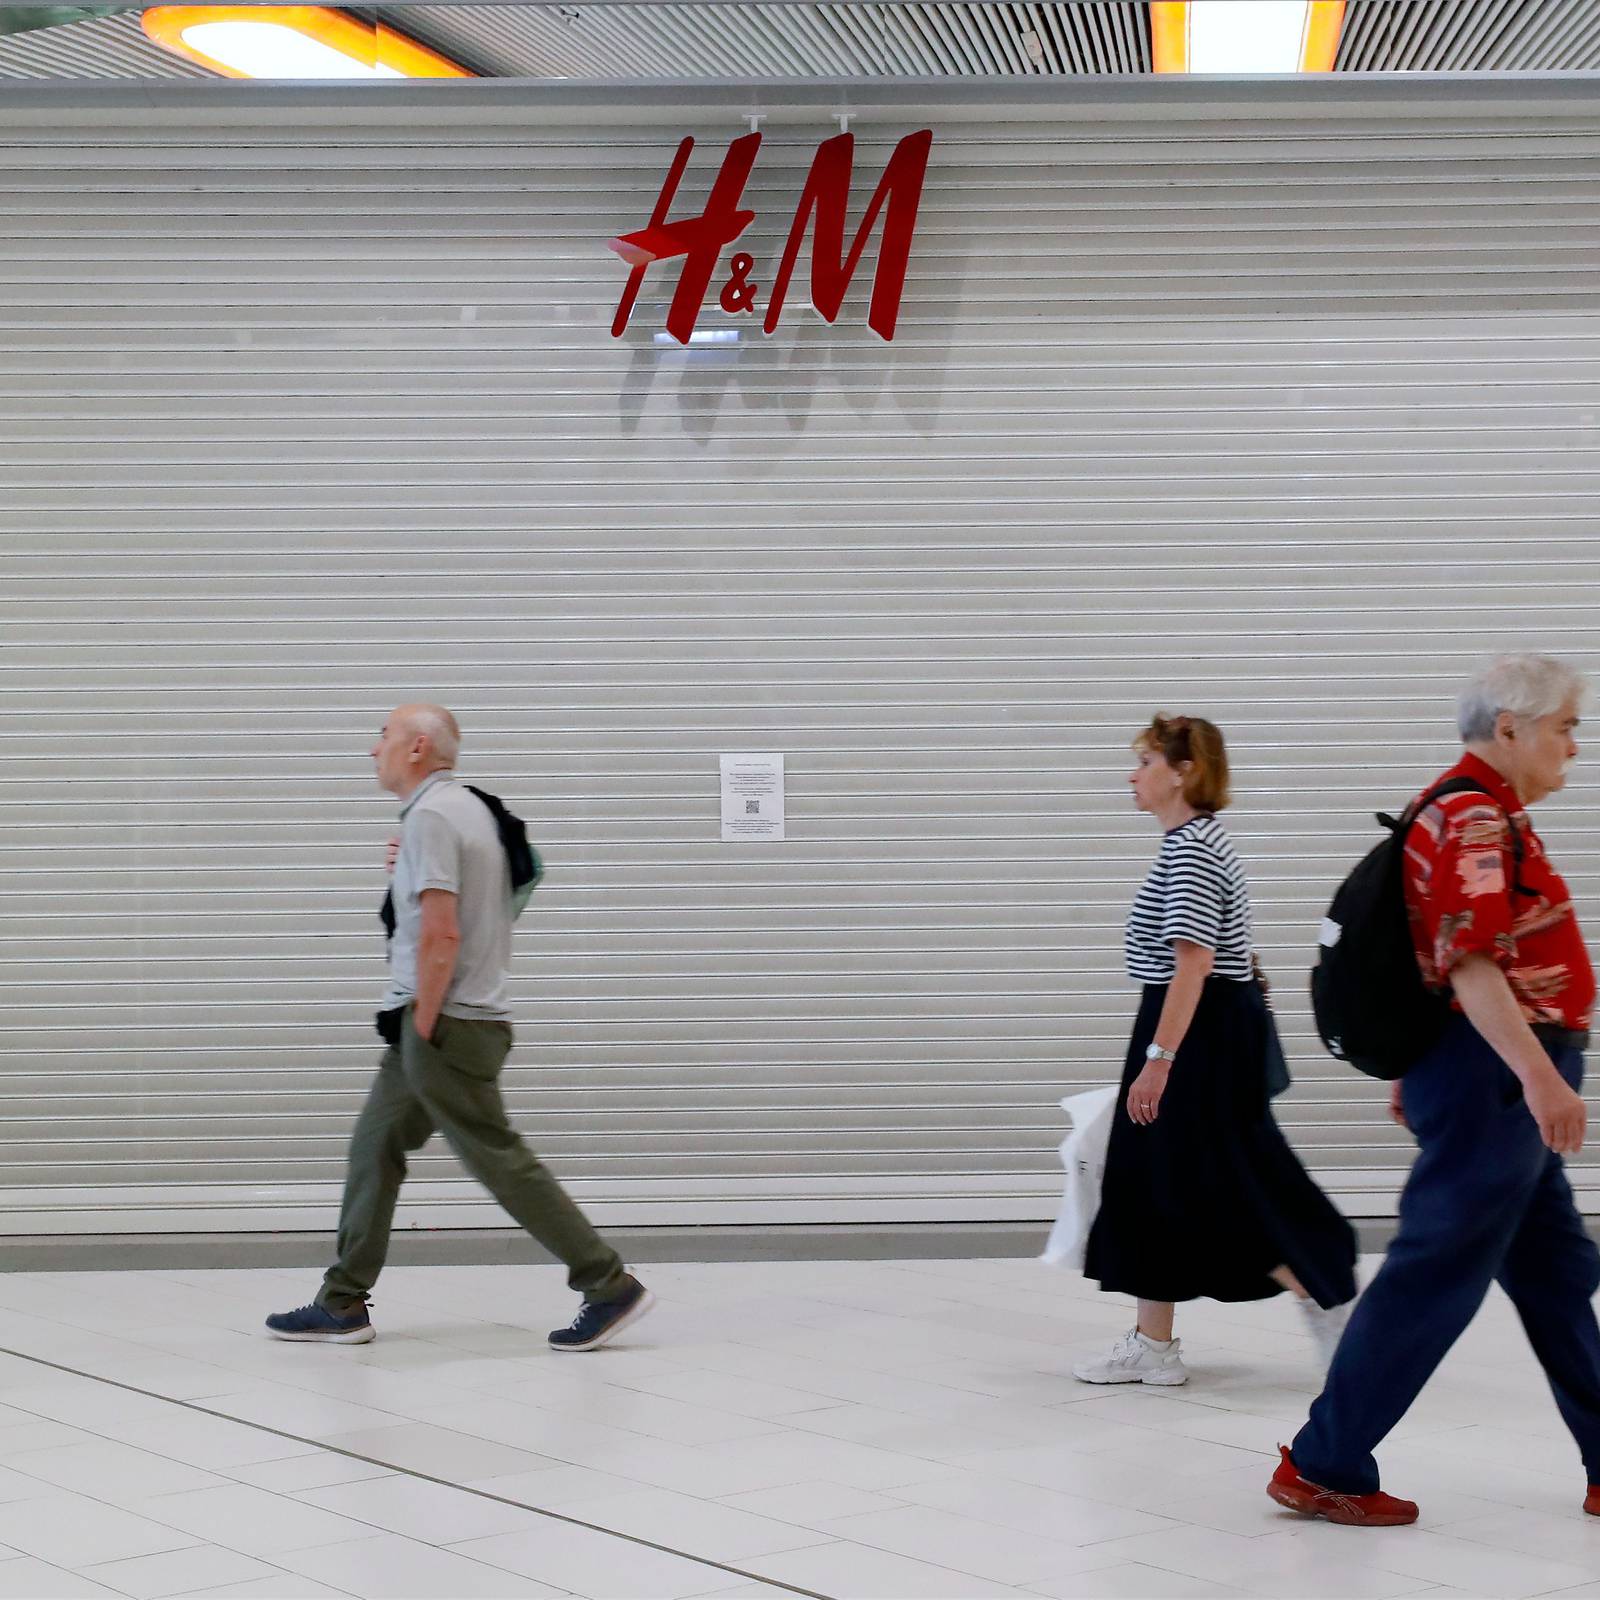 H&M flags higher prices after profit falls far short of expectations